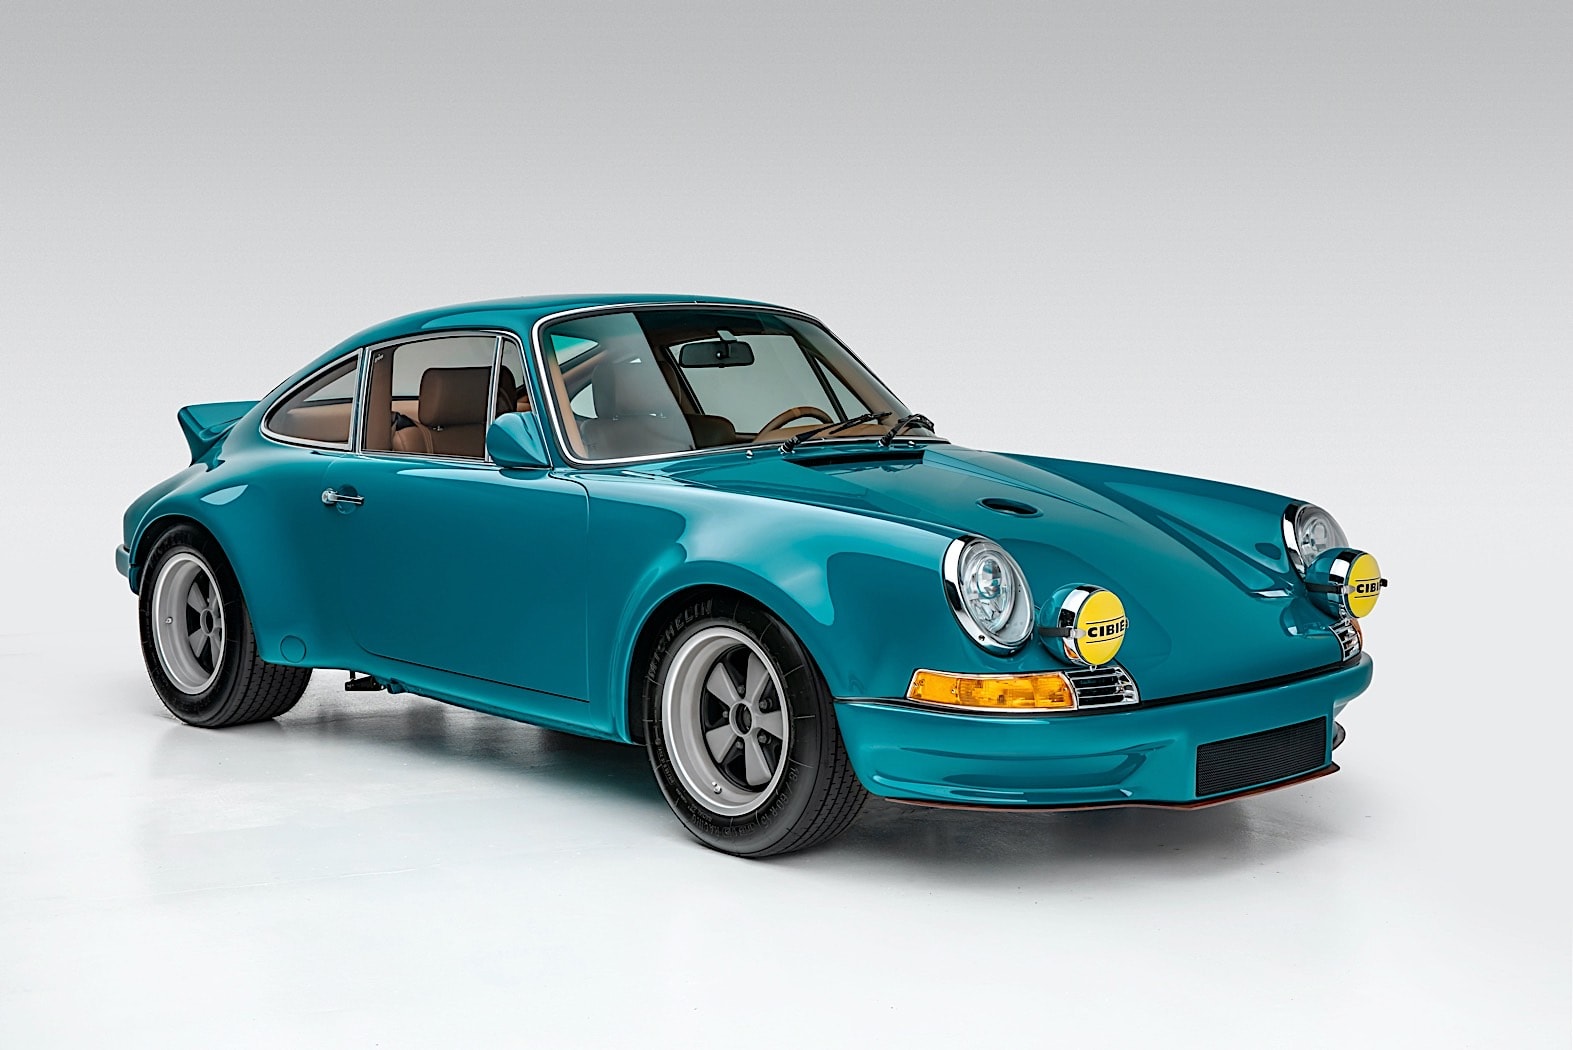 1975 911 Twin Turbo RSR Is the Porsche Beauty of the Week - autoevolution